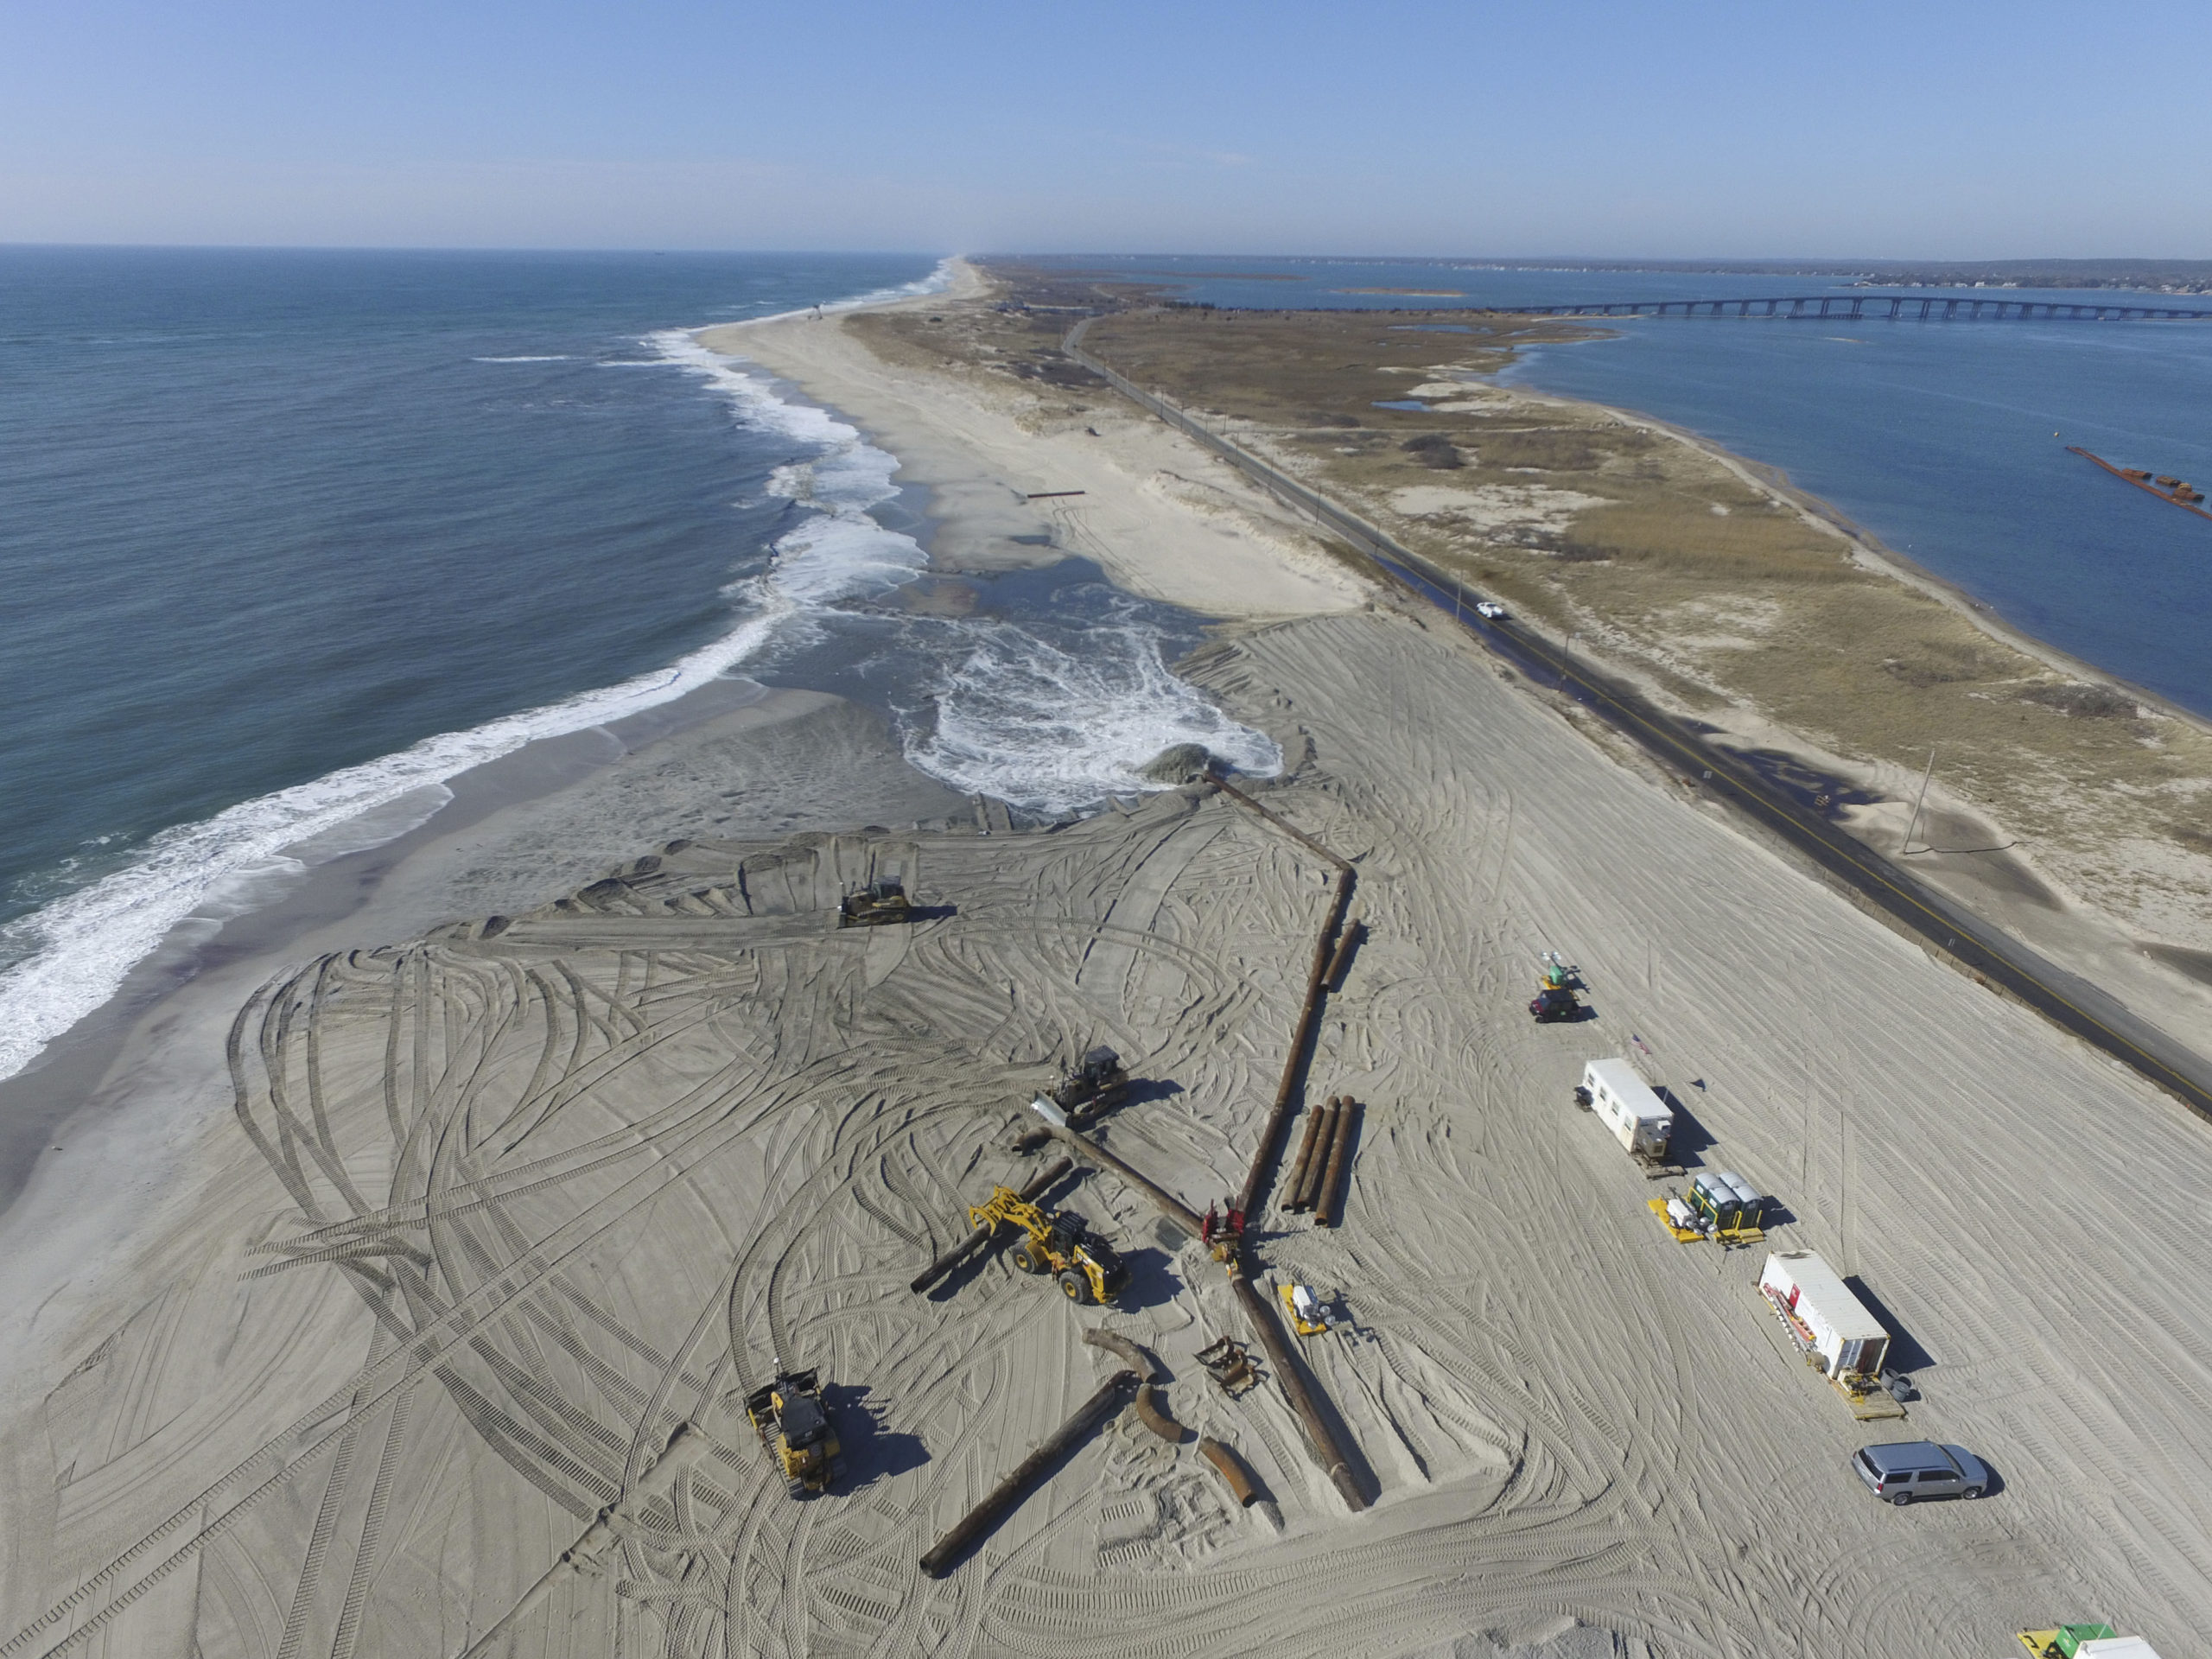 The federal Army Corps of Engineers told local officials this week that the South Fork has been bumped down the priority list for beach nourishment and will not see significant beach nourishment until 2023.